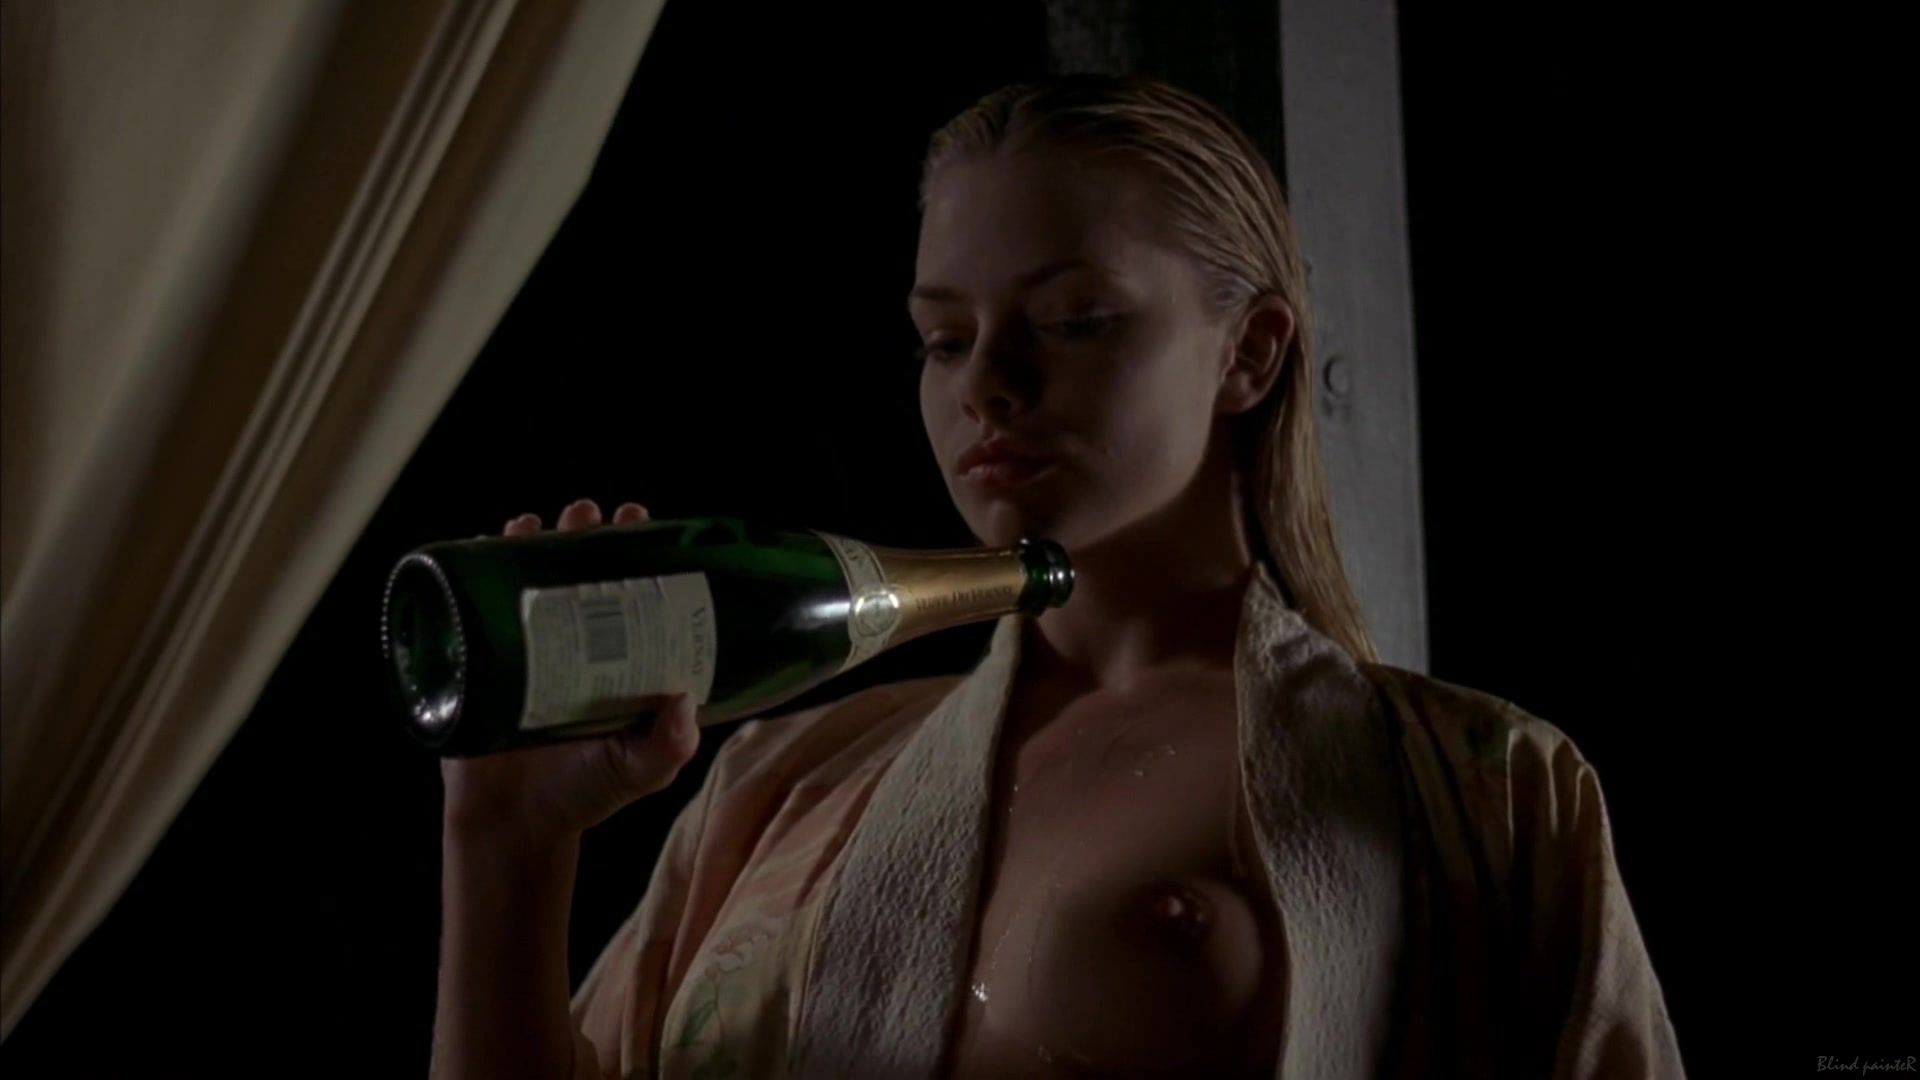 Jaime Pressly Tits In Latex - Jaime Pressly nude - Poison Ivy 3 (1997) Video Â» Best Sexy ...